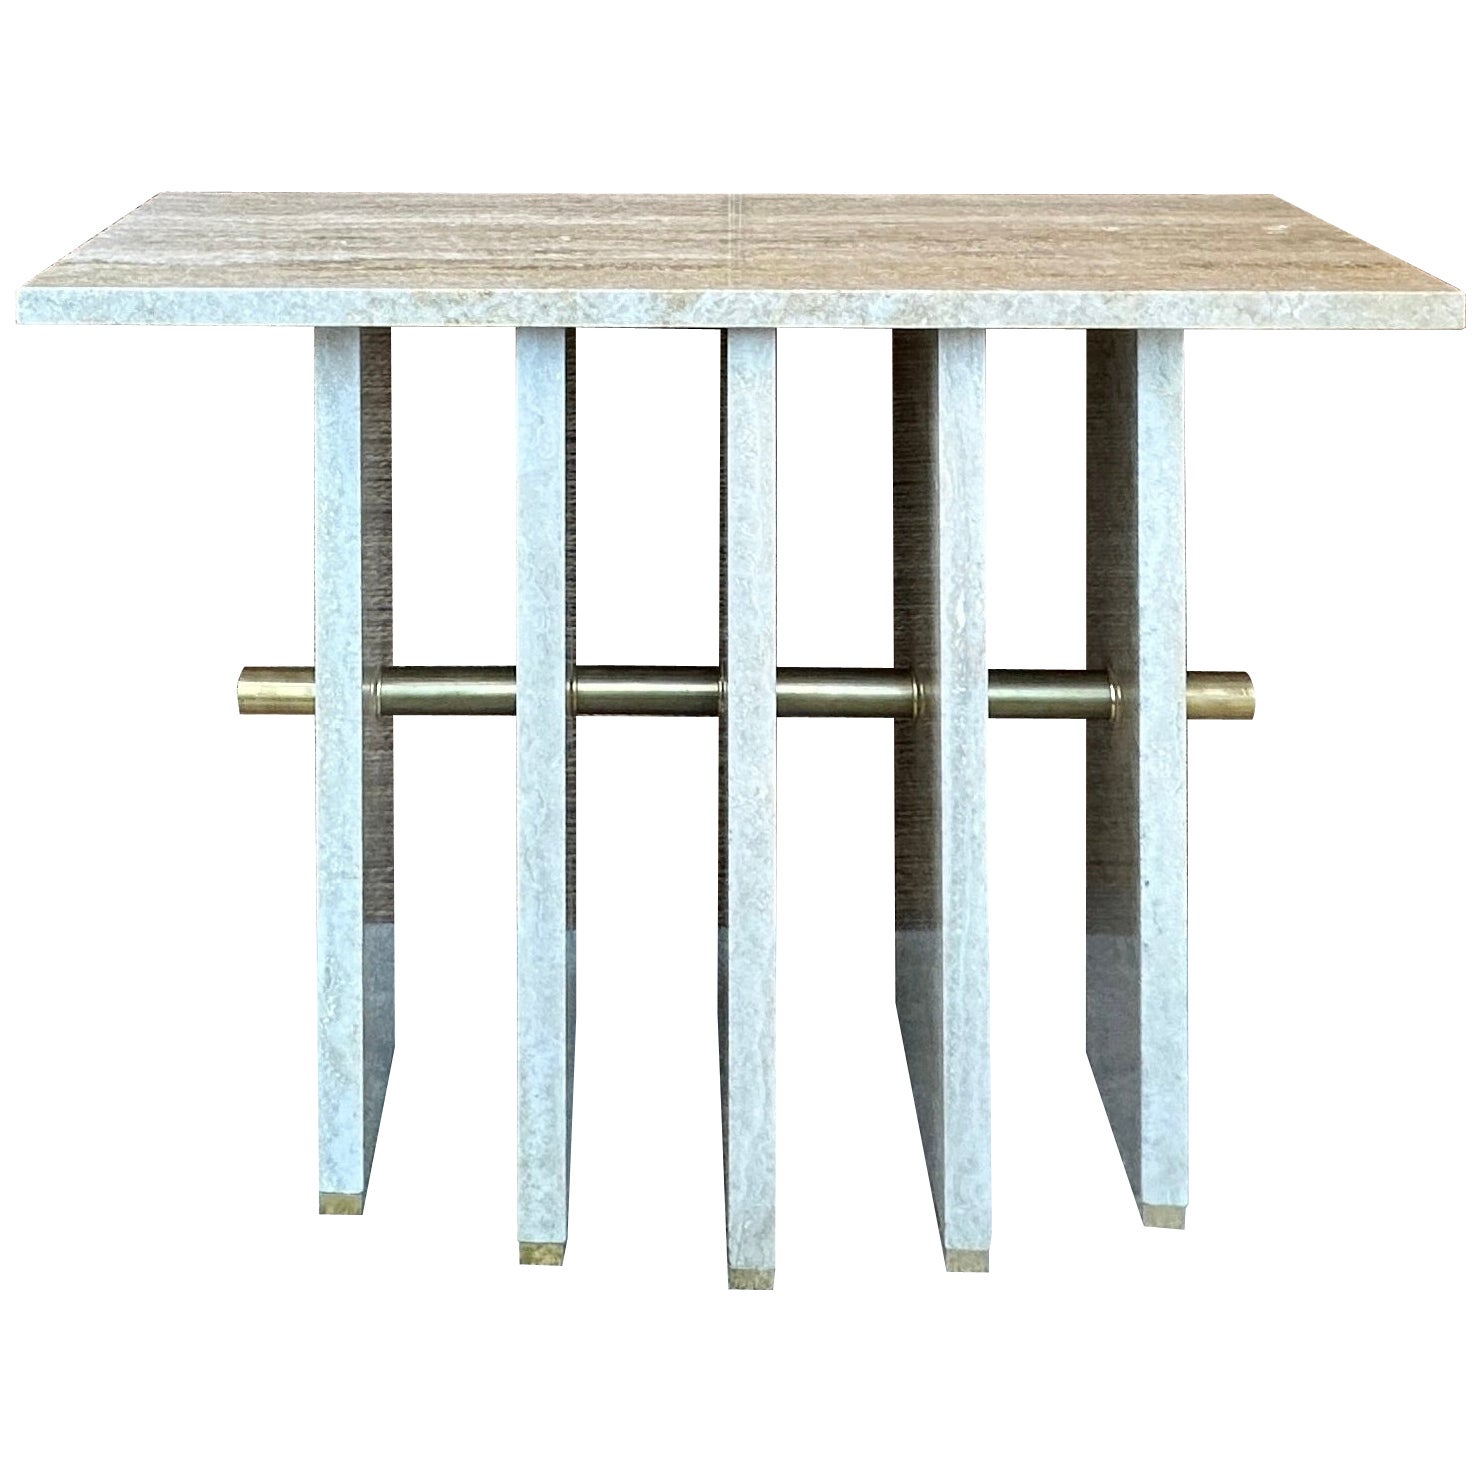 Late 20th Century Italian Travertine with Brass Details Console Table